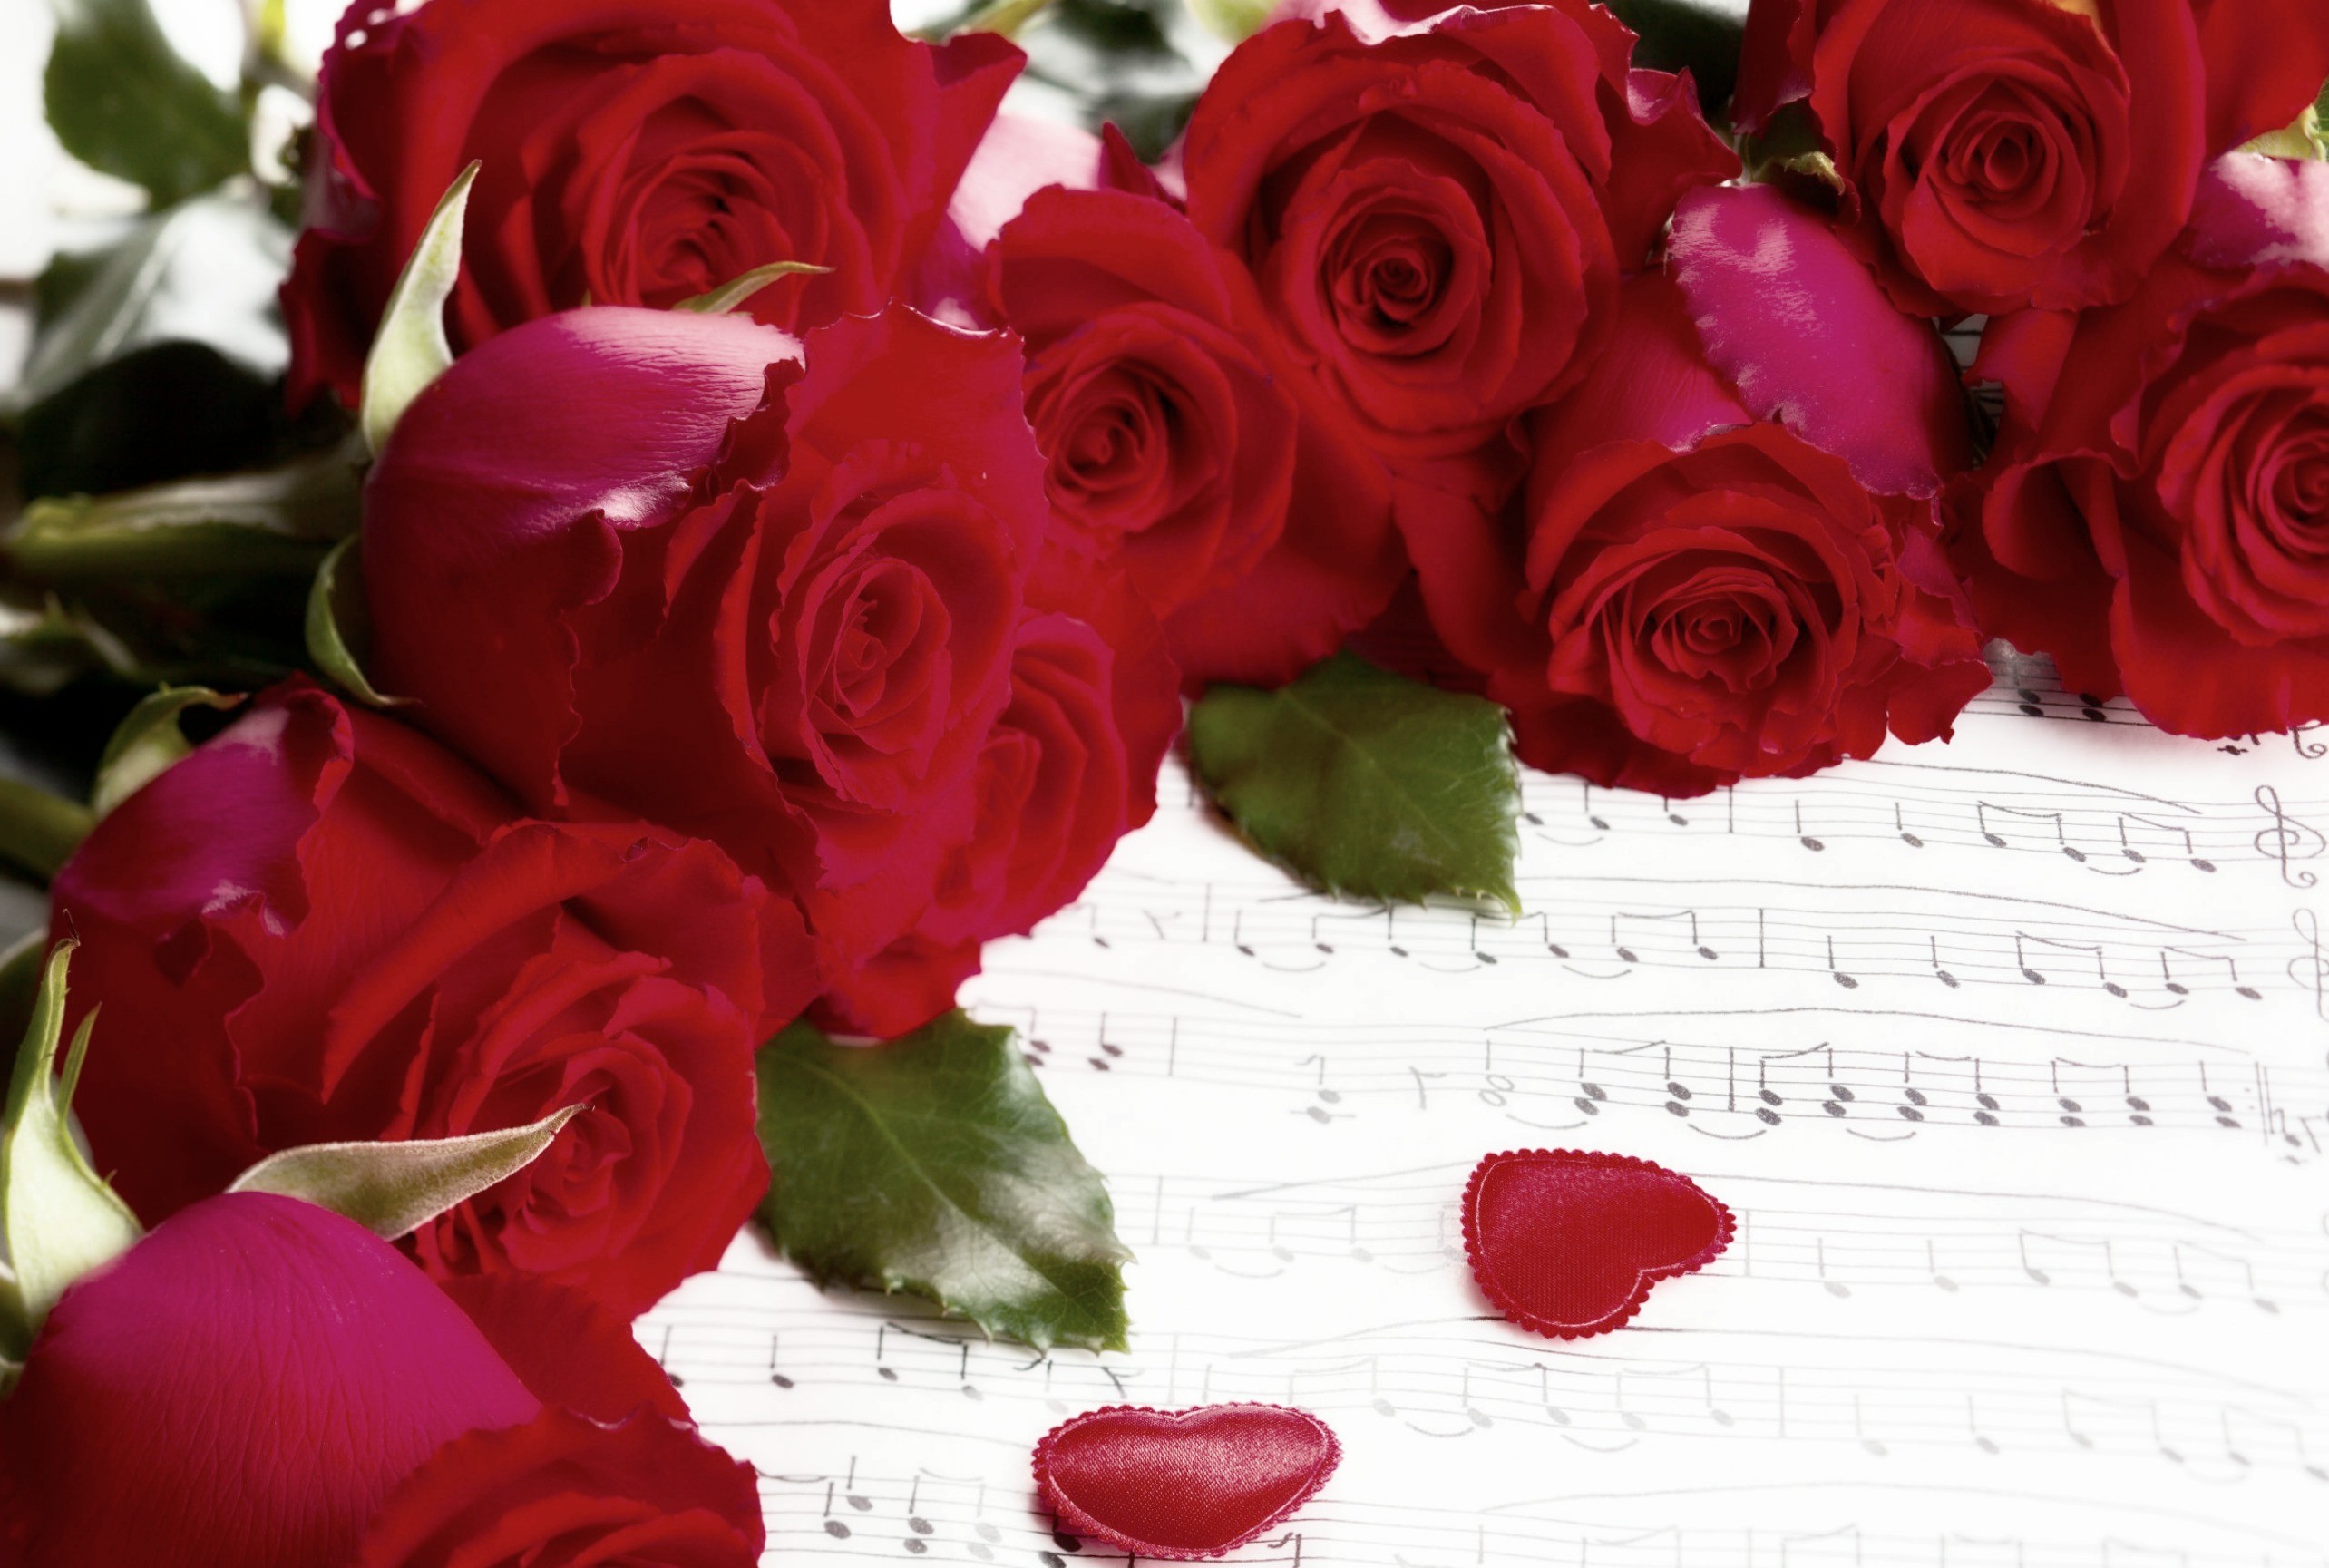 Rose and music photo